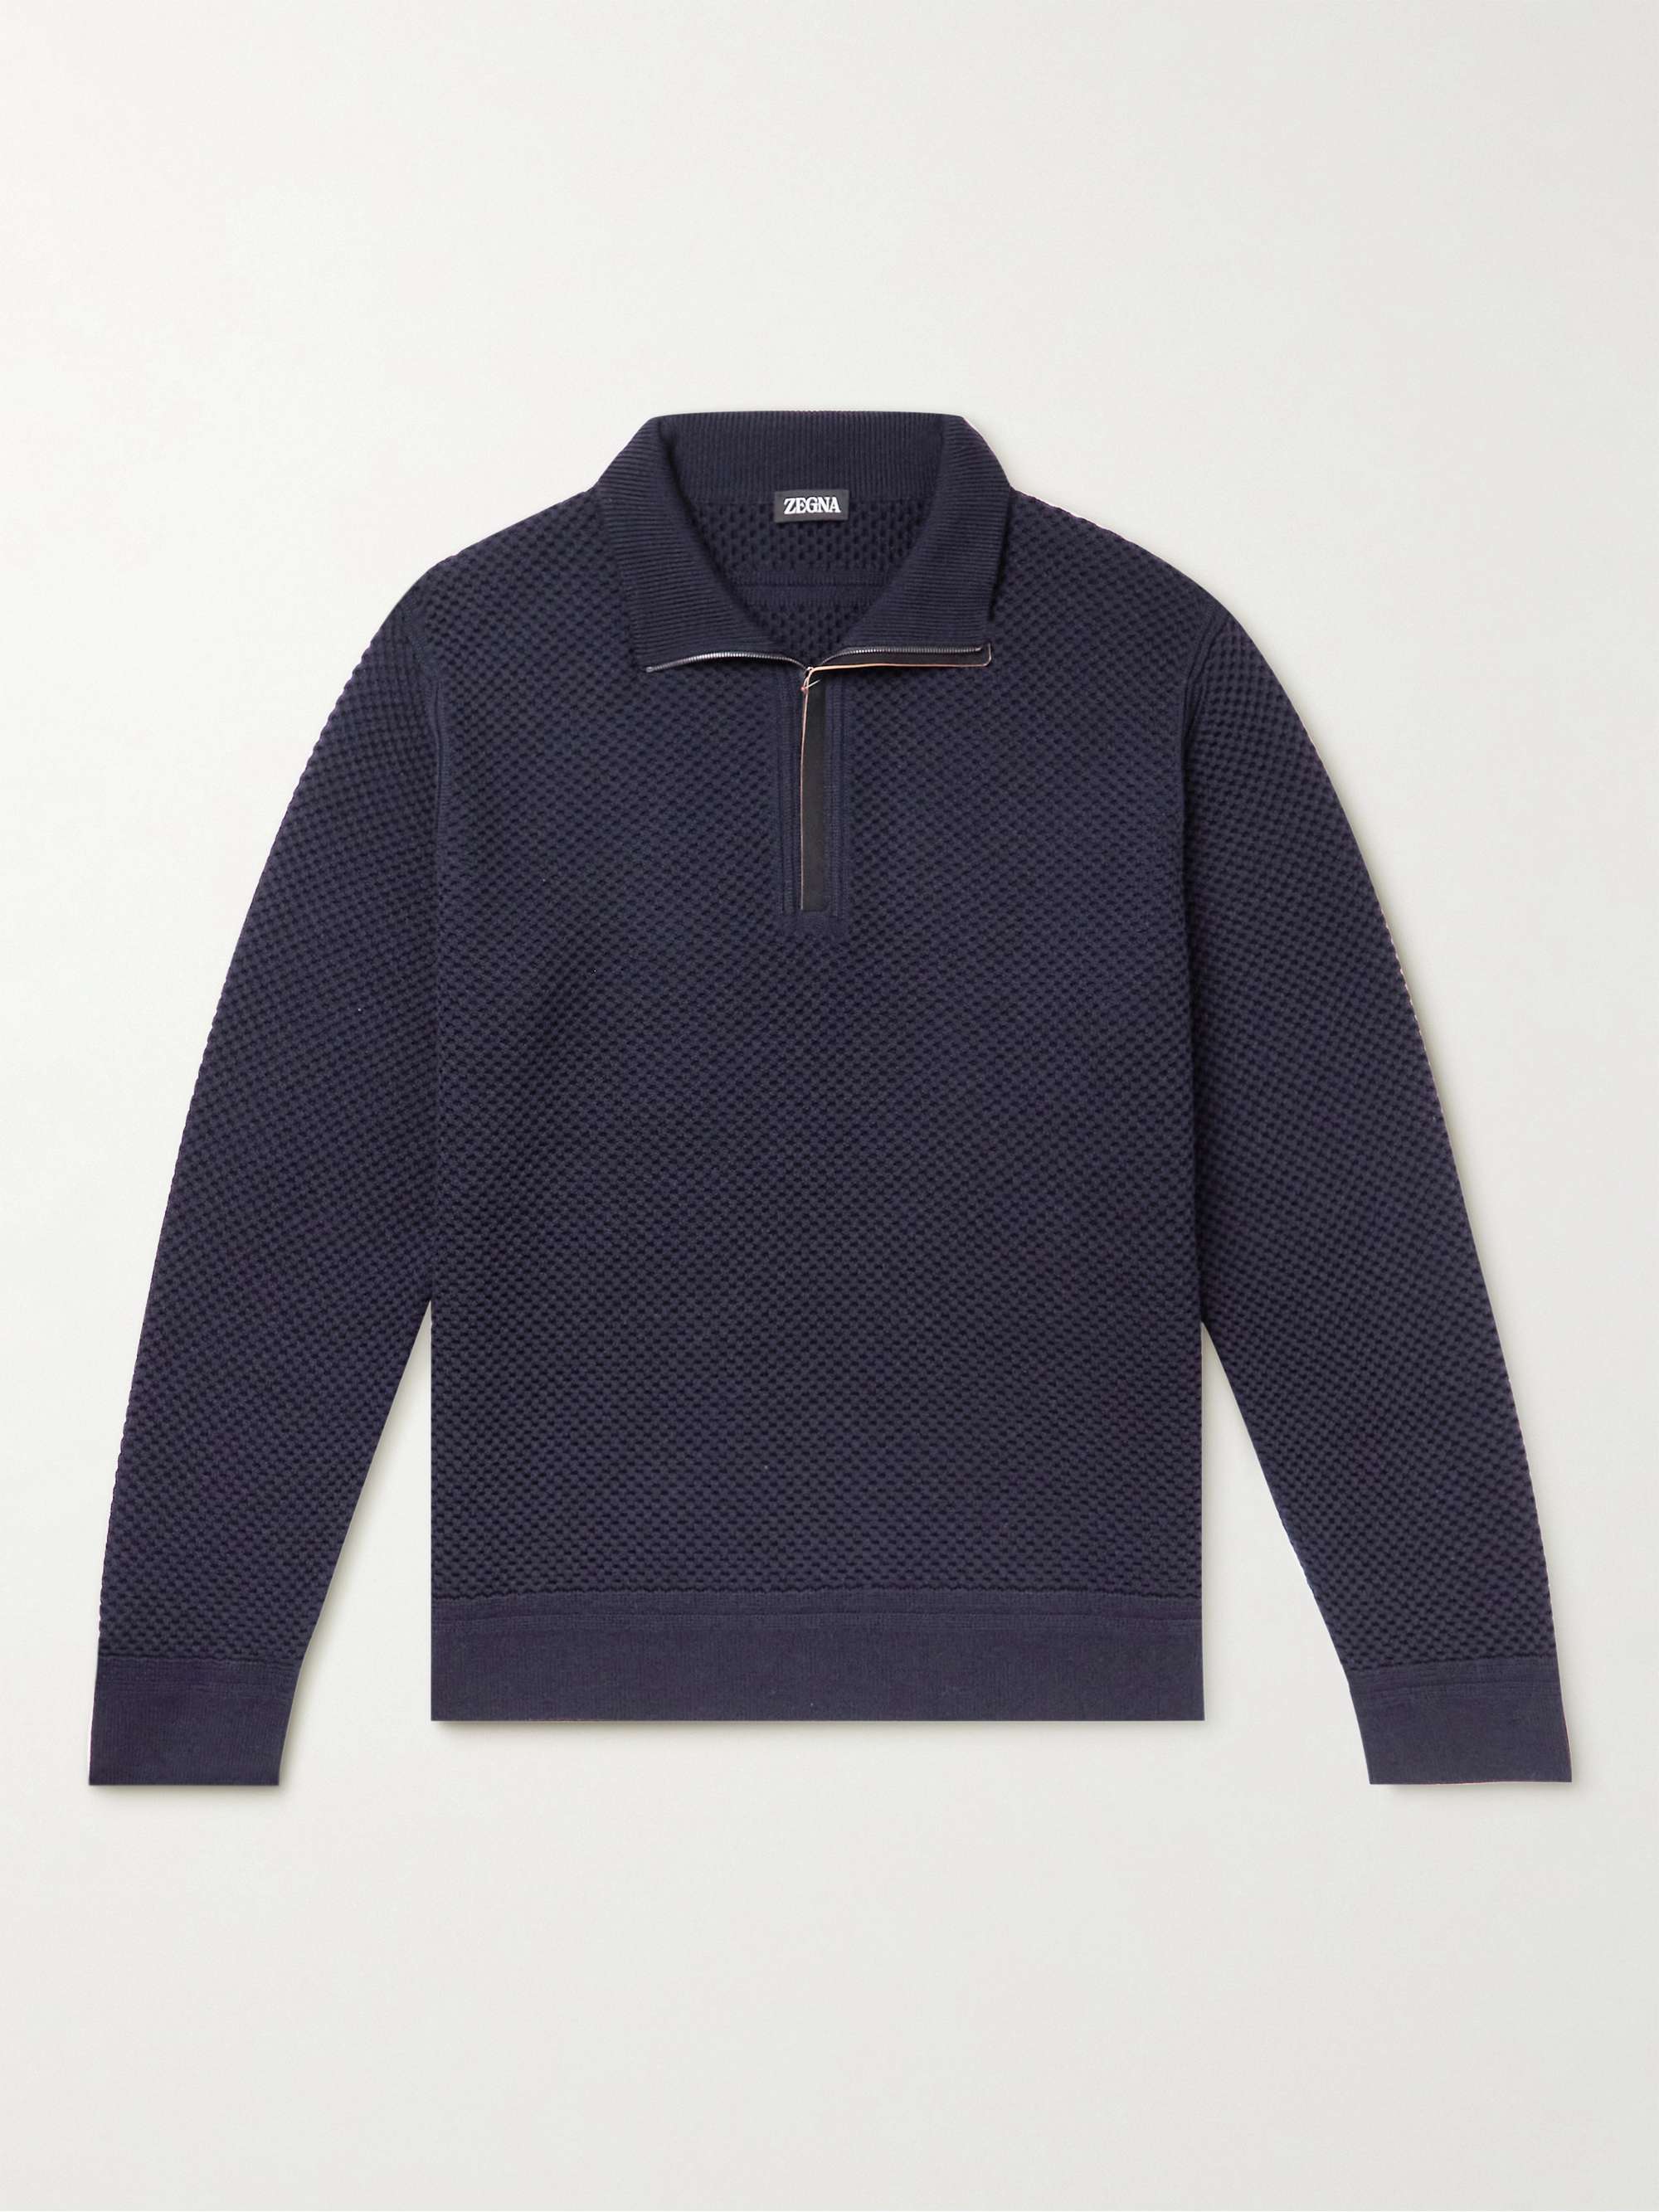 ZEGNA Leather-Trimmed Waffle-Knit Wool and Cashmere Half-Zip Sweater for  Men | MR PORTER